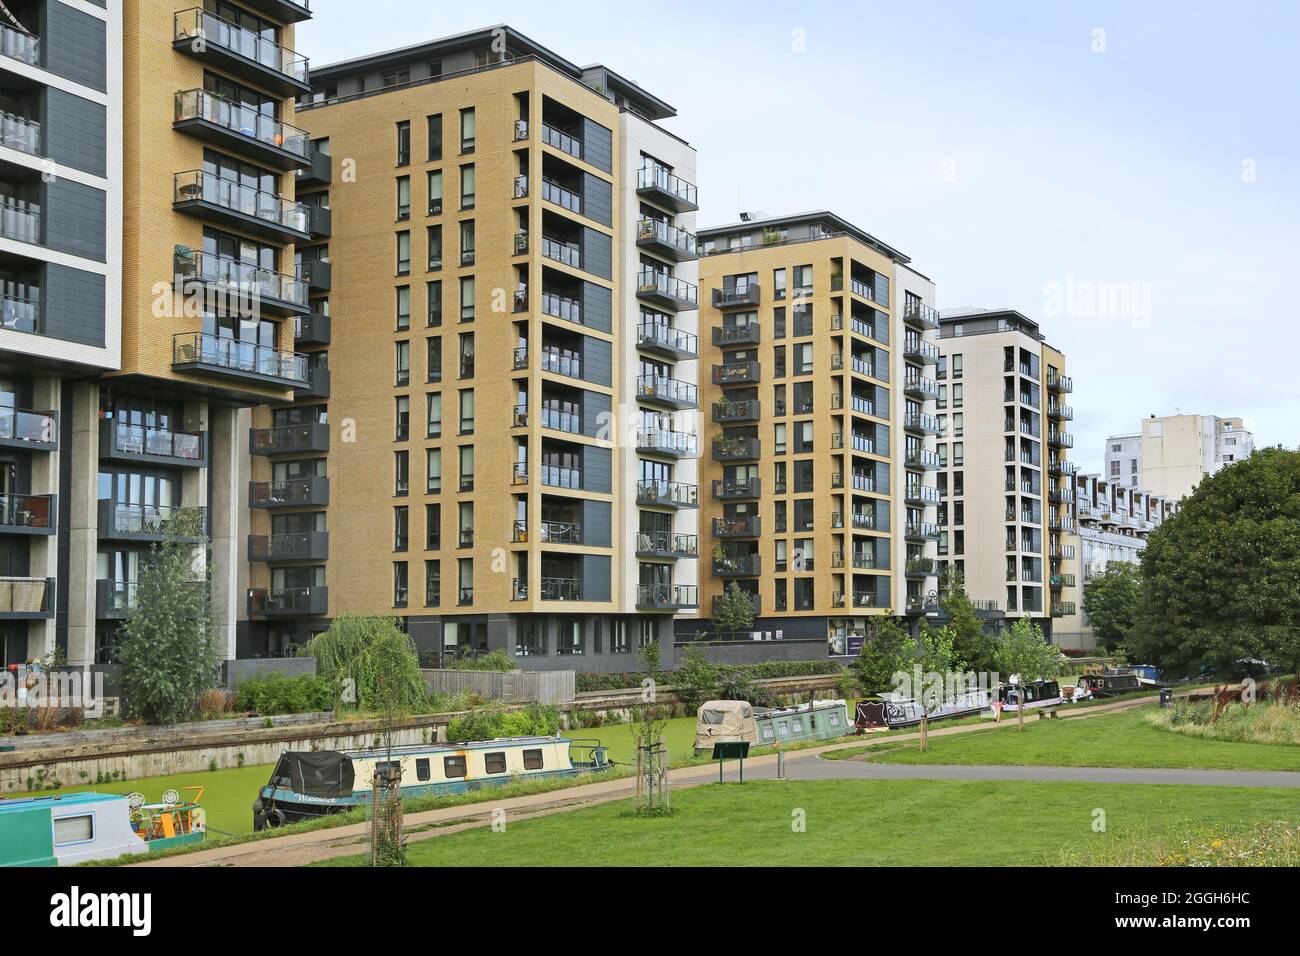 Suttons Wharf, a new residential development next to the Grand Union Canal in East London. Designed by Burwell Deakins Architects Stock Photo